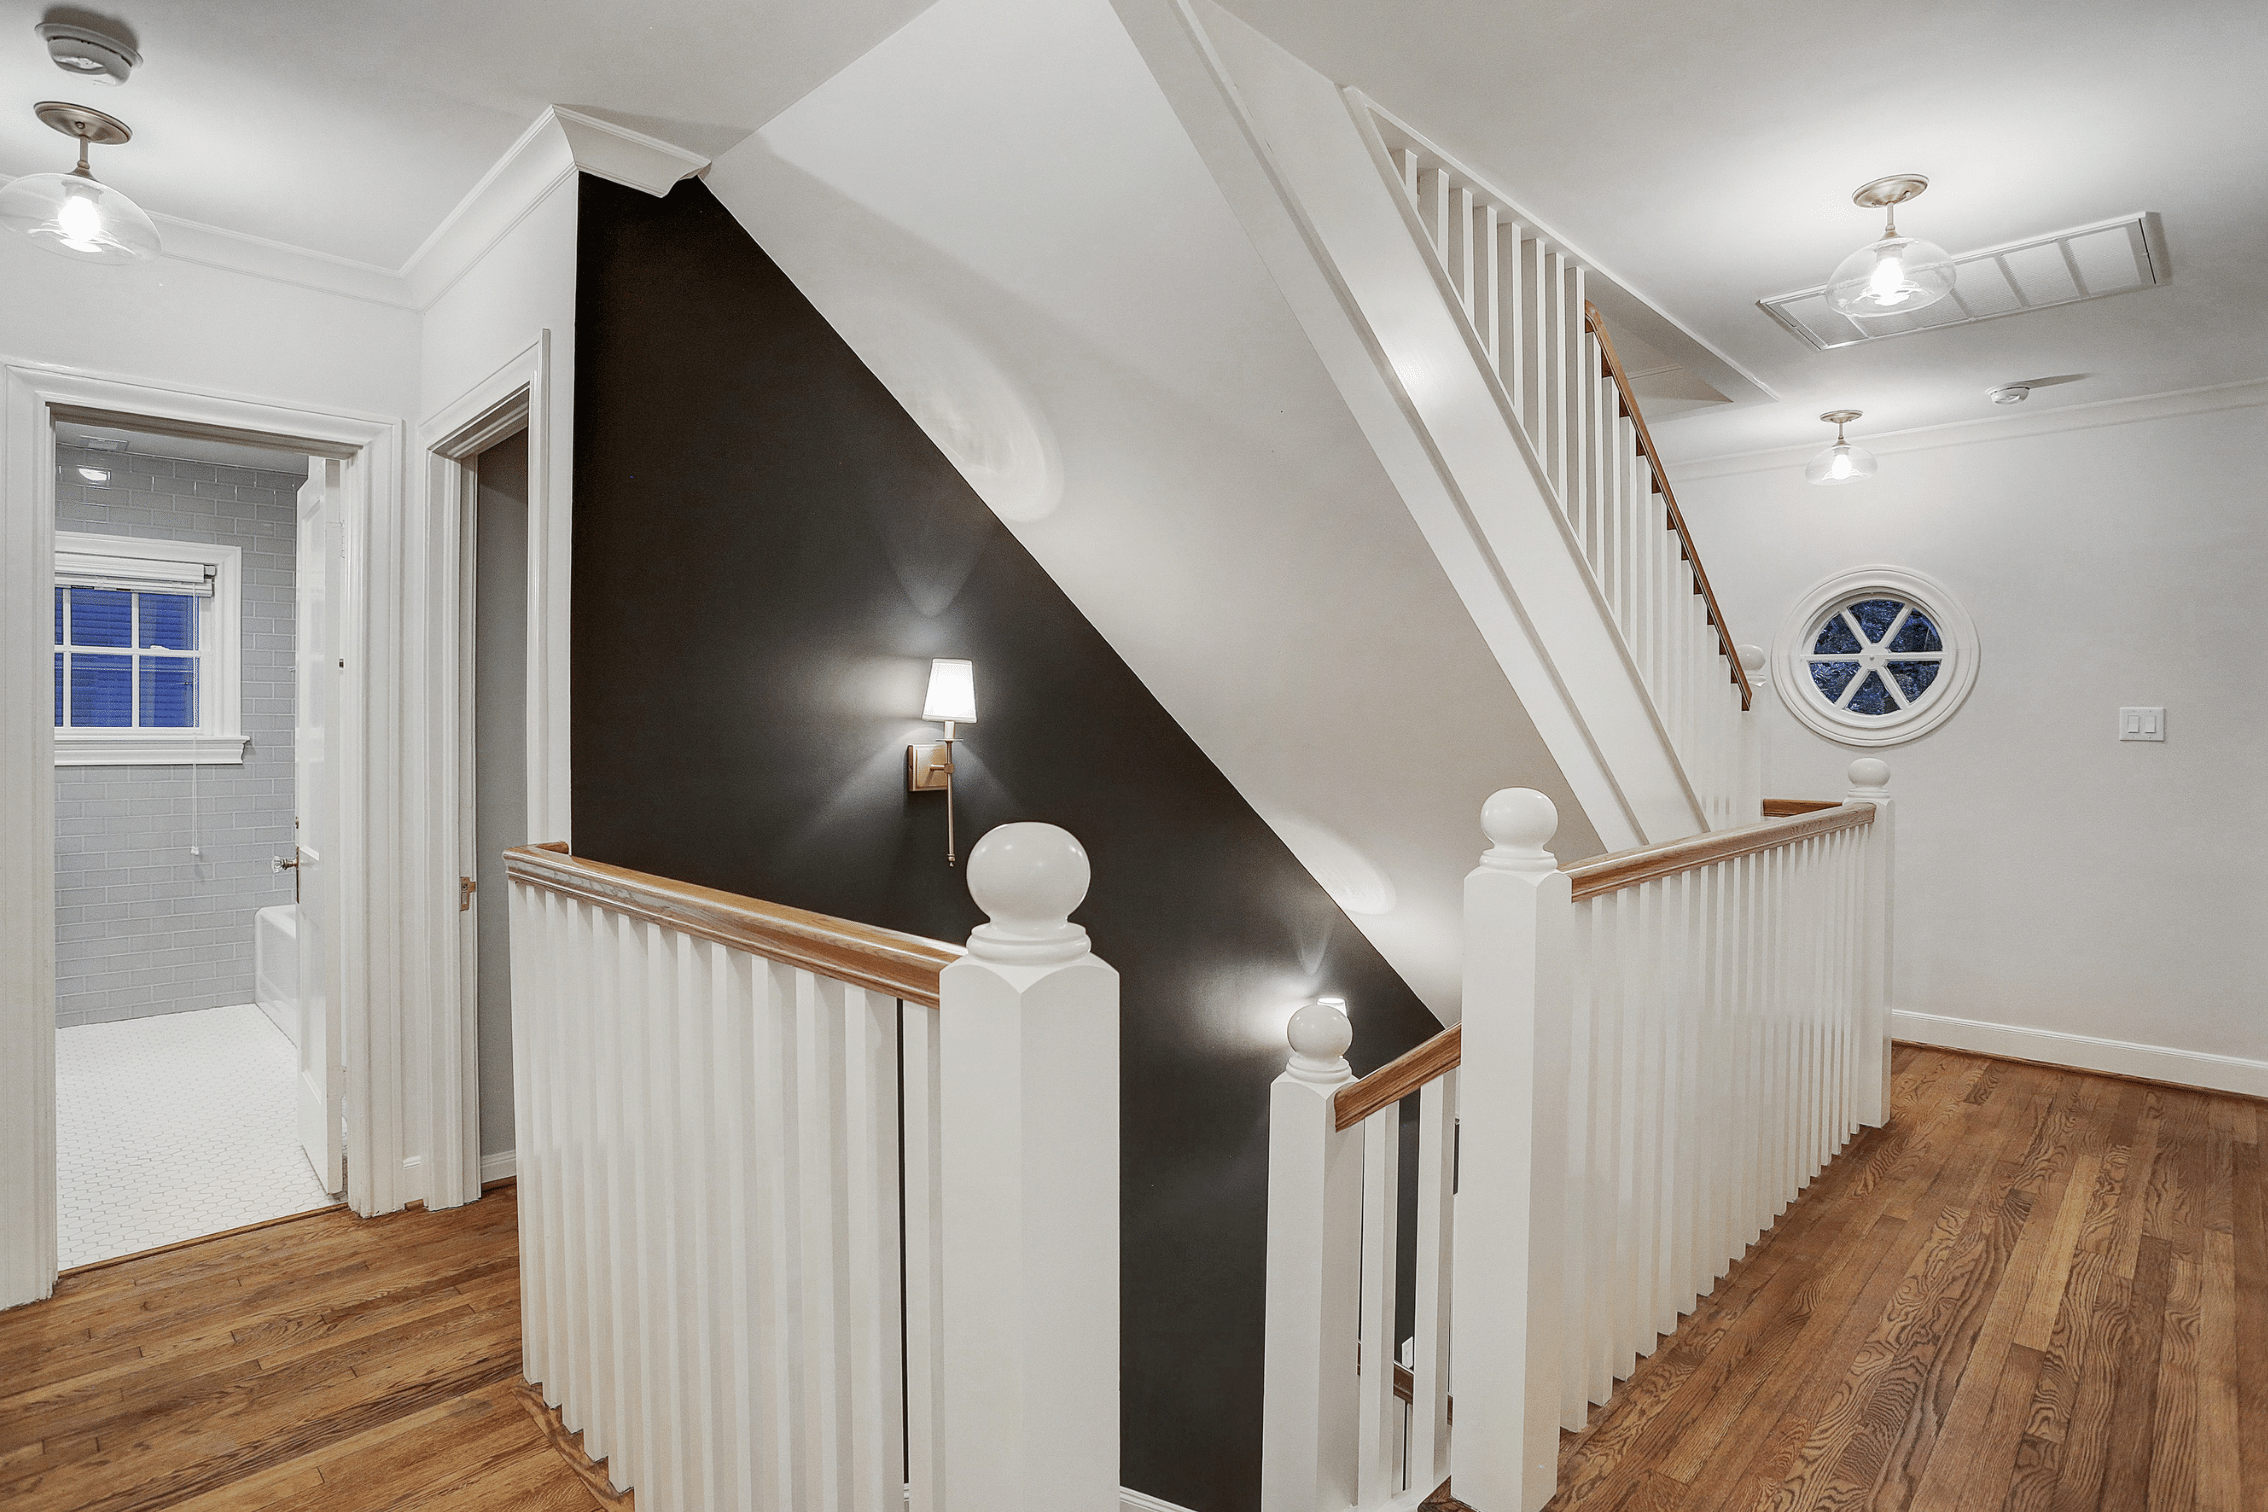 Staircase Area in Historic Themed Home